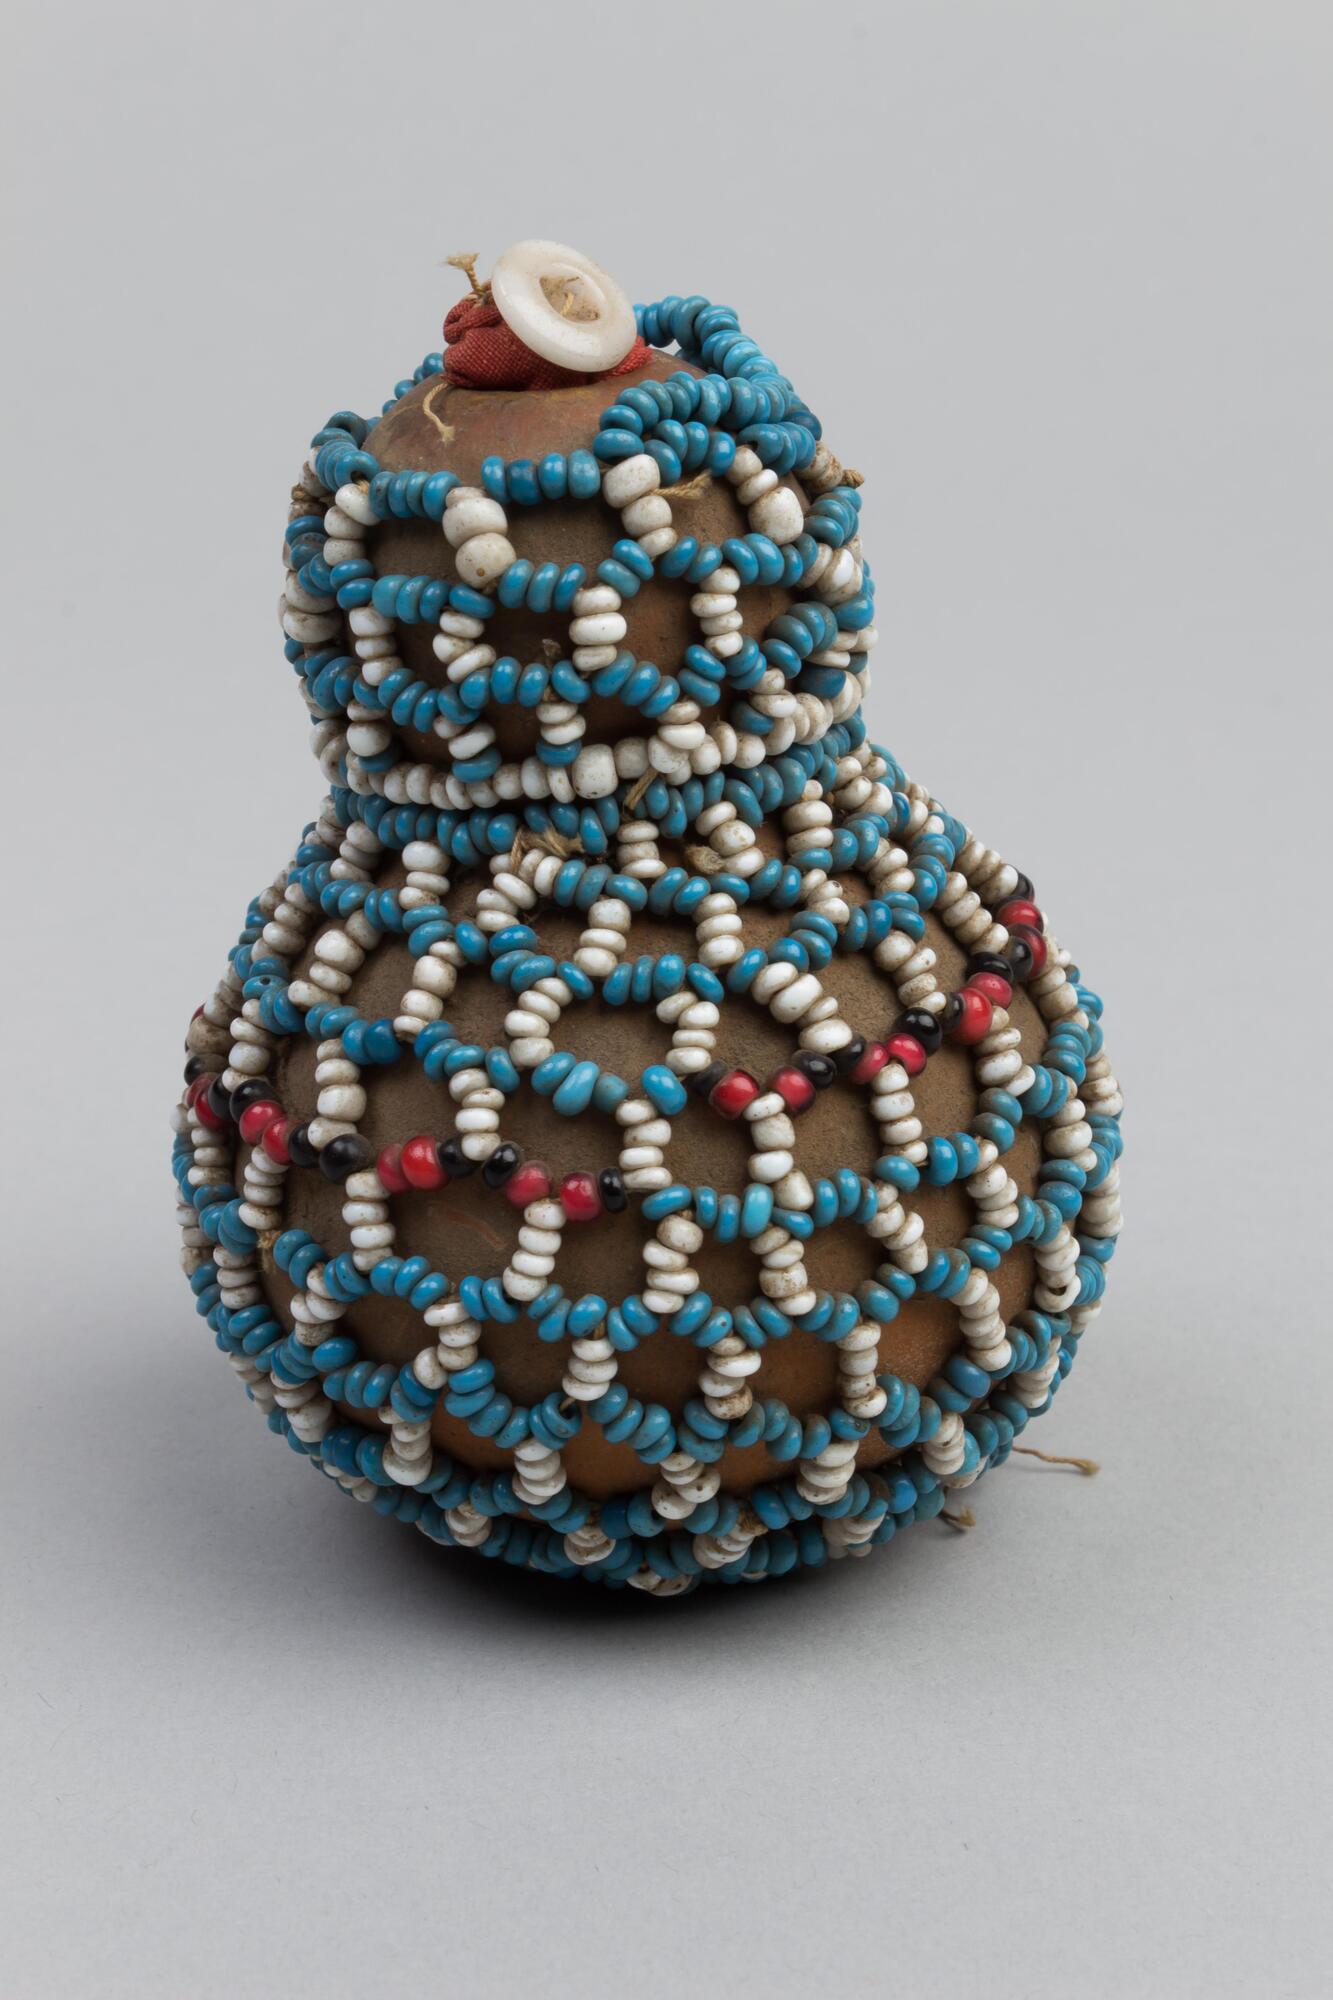 Gourd with beaded open weave cover in blue and white with some small short black and red detail. Gourd is filled with red fabric with buttons at top. Short blue beaded handle at top, white tag attached.